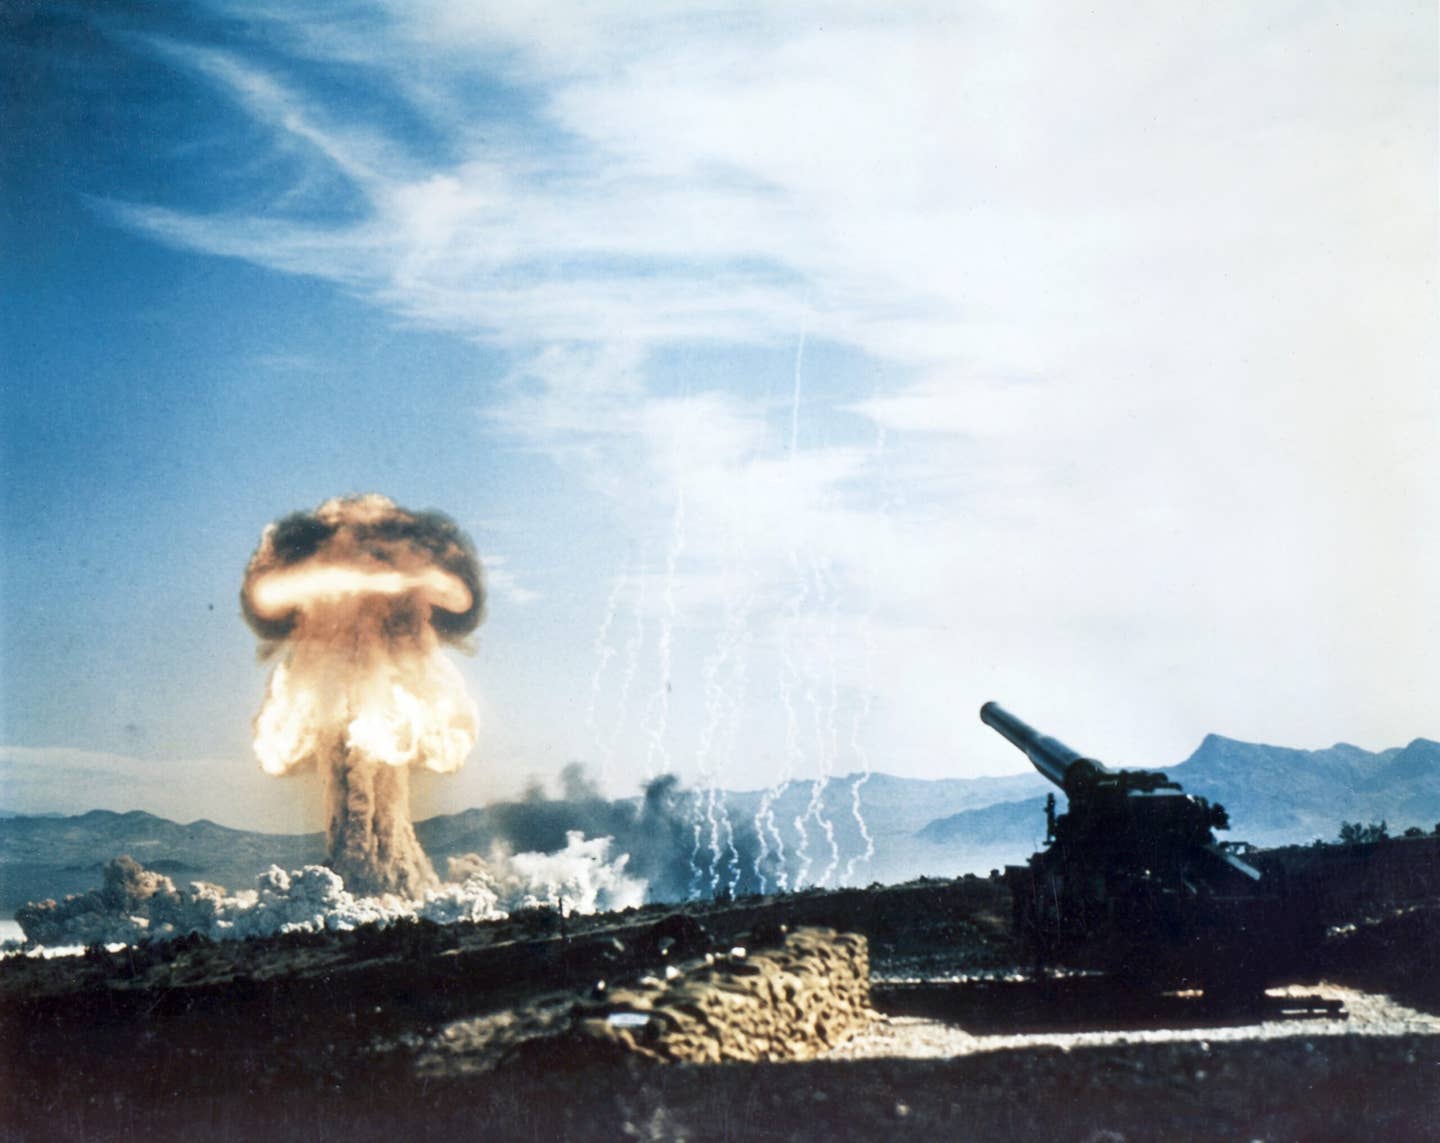 Part of Operation Upshot-Knothole saw a 15-kiloton nuclear explosion test on May 25, 1953 at the Nevada Proving Grounds, known as the<em> </em>Grable&nbsp;test.<em> U.S. government </em>